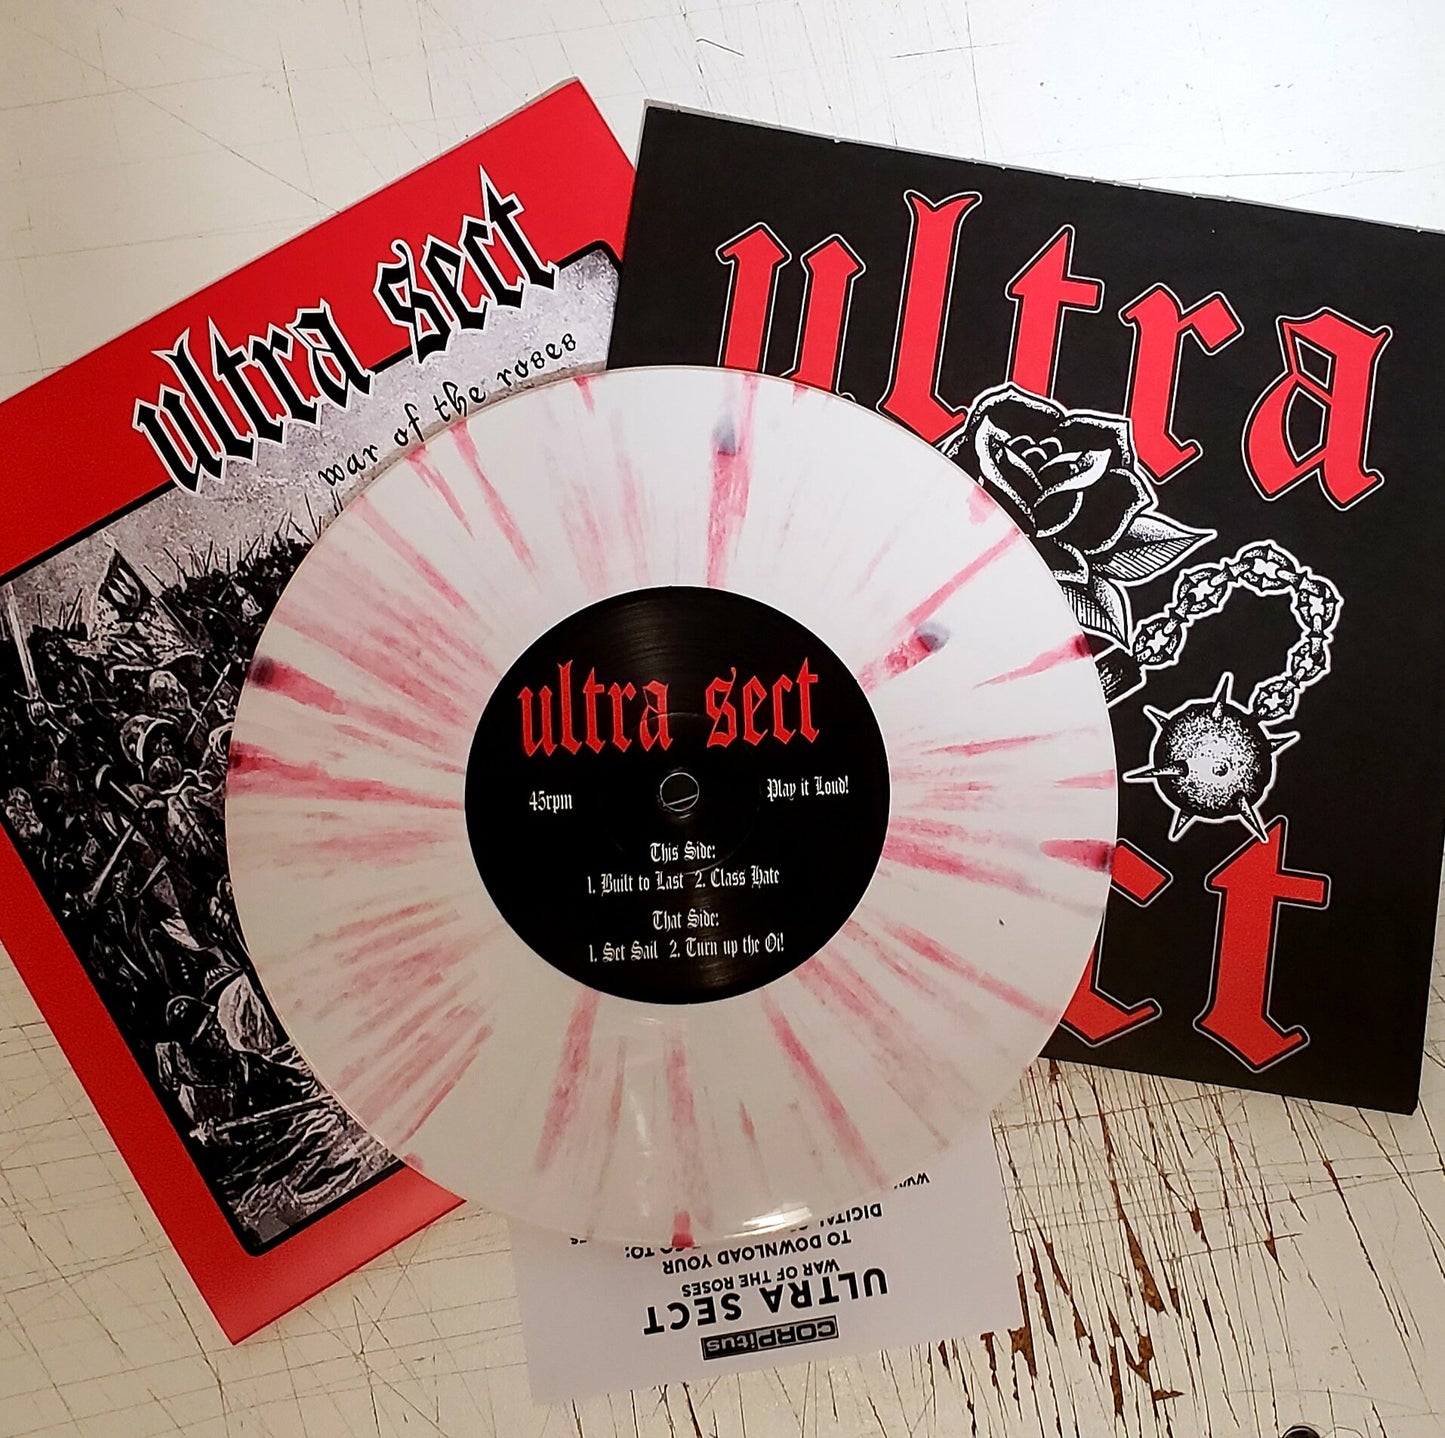 Ultra Sect "War of the Roses" 7" EP